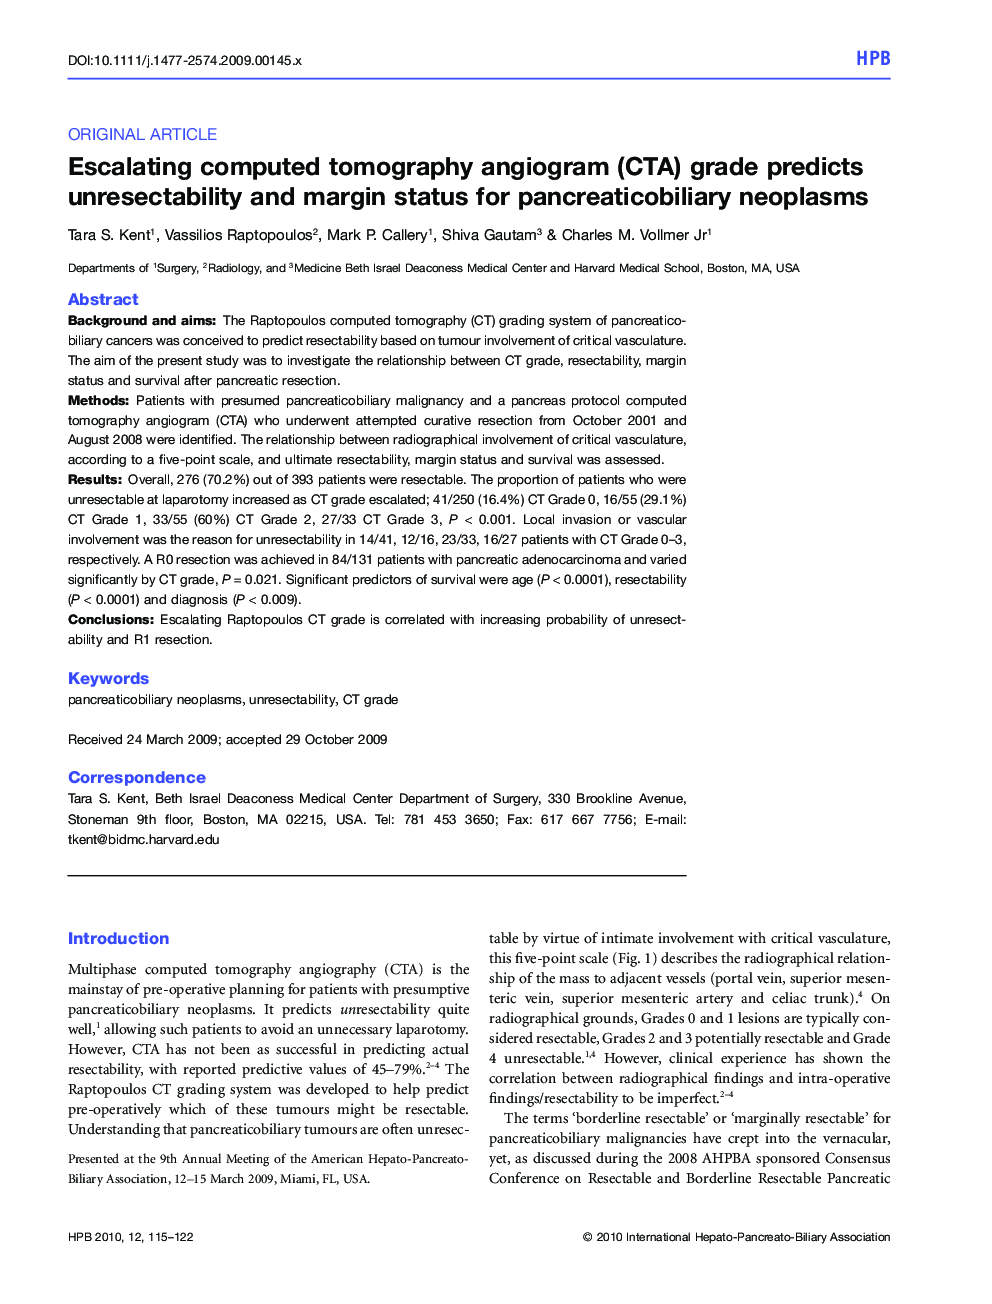 Escalating computed tomography angiogram (CTA) grade predicts unresectability and margin status for pancreaticobiliary neoplasms